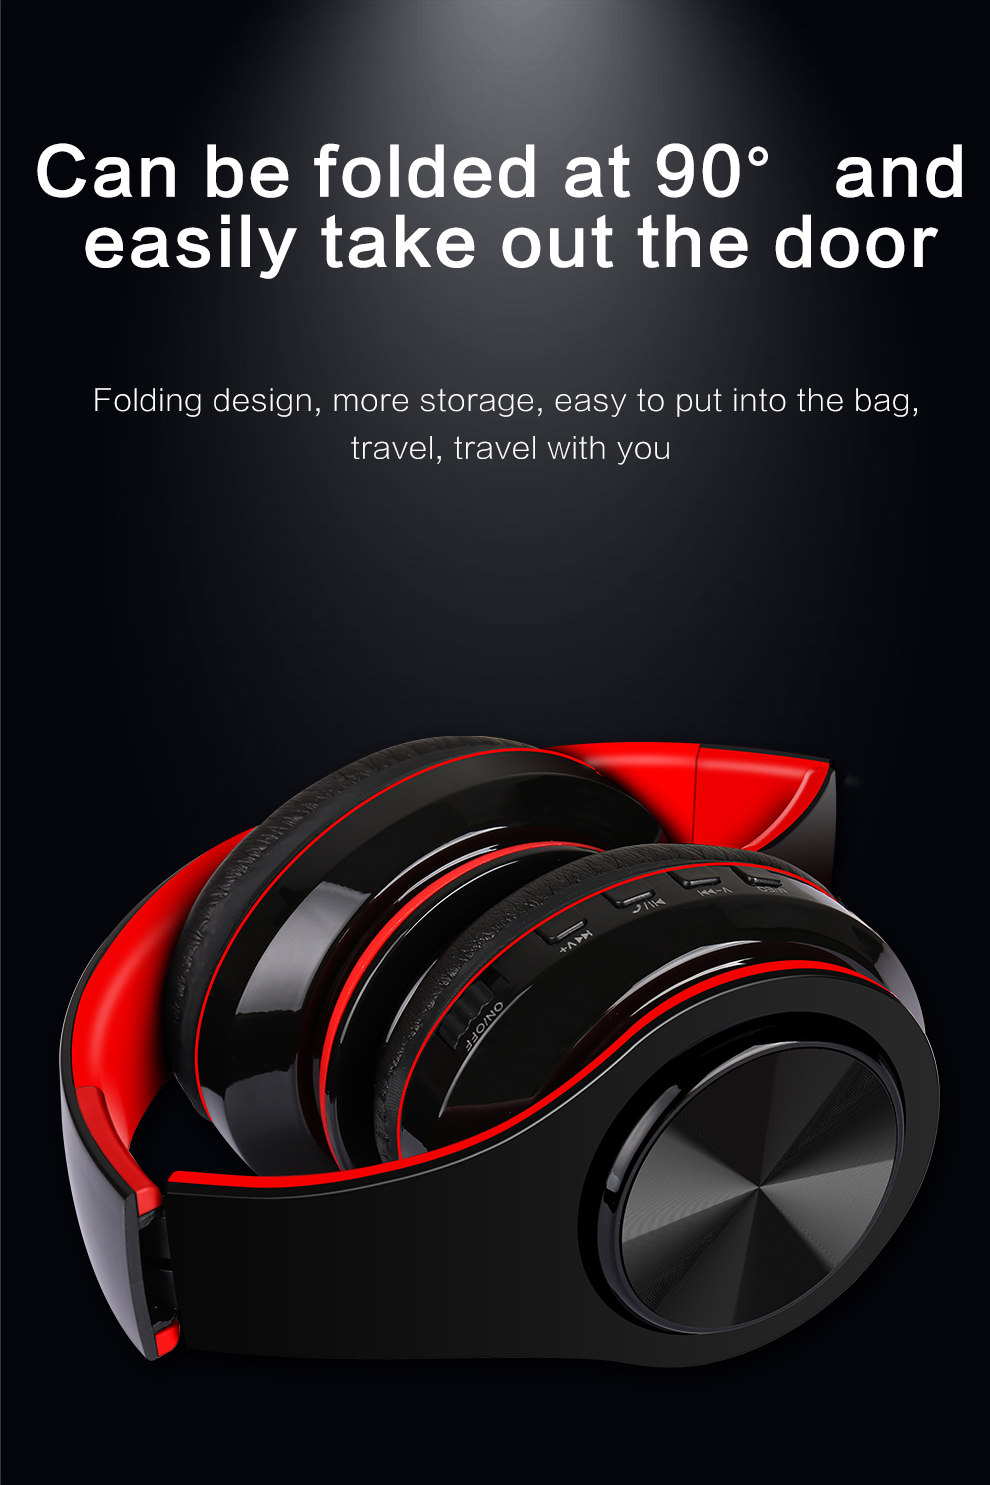 4. LM-FG69 Wireless Bluetooth Headset Bulk Corporate Purchase from China Union Power -Description-